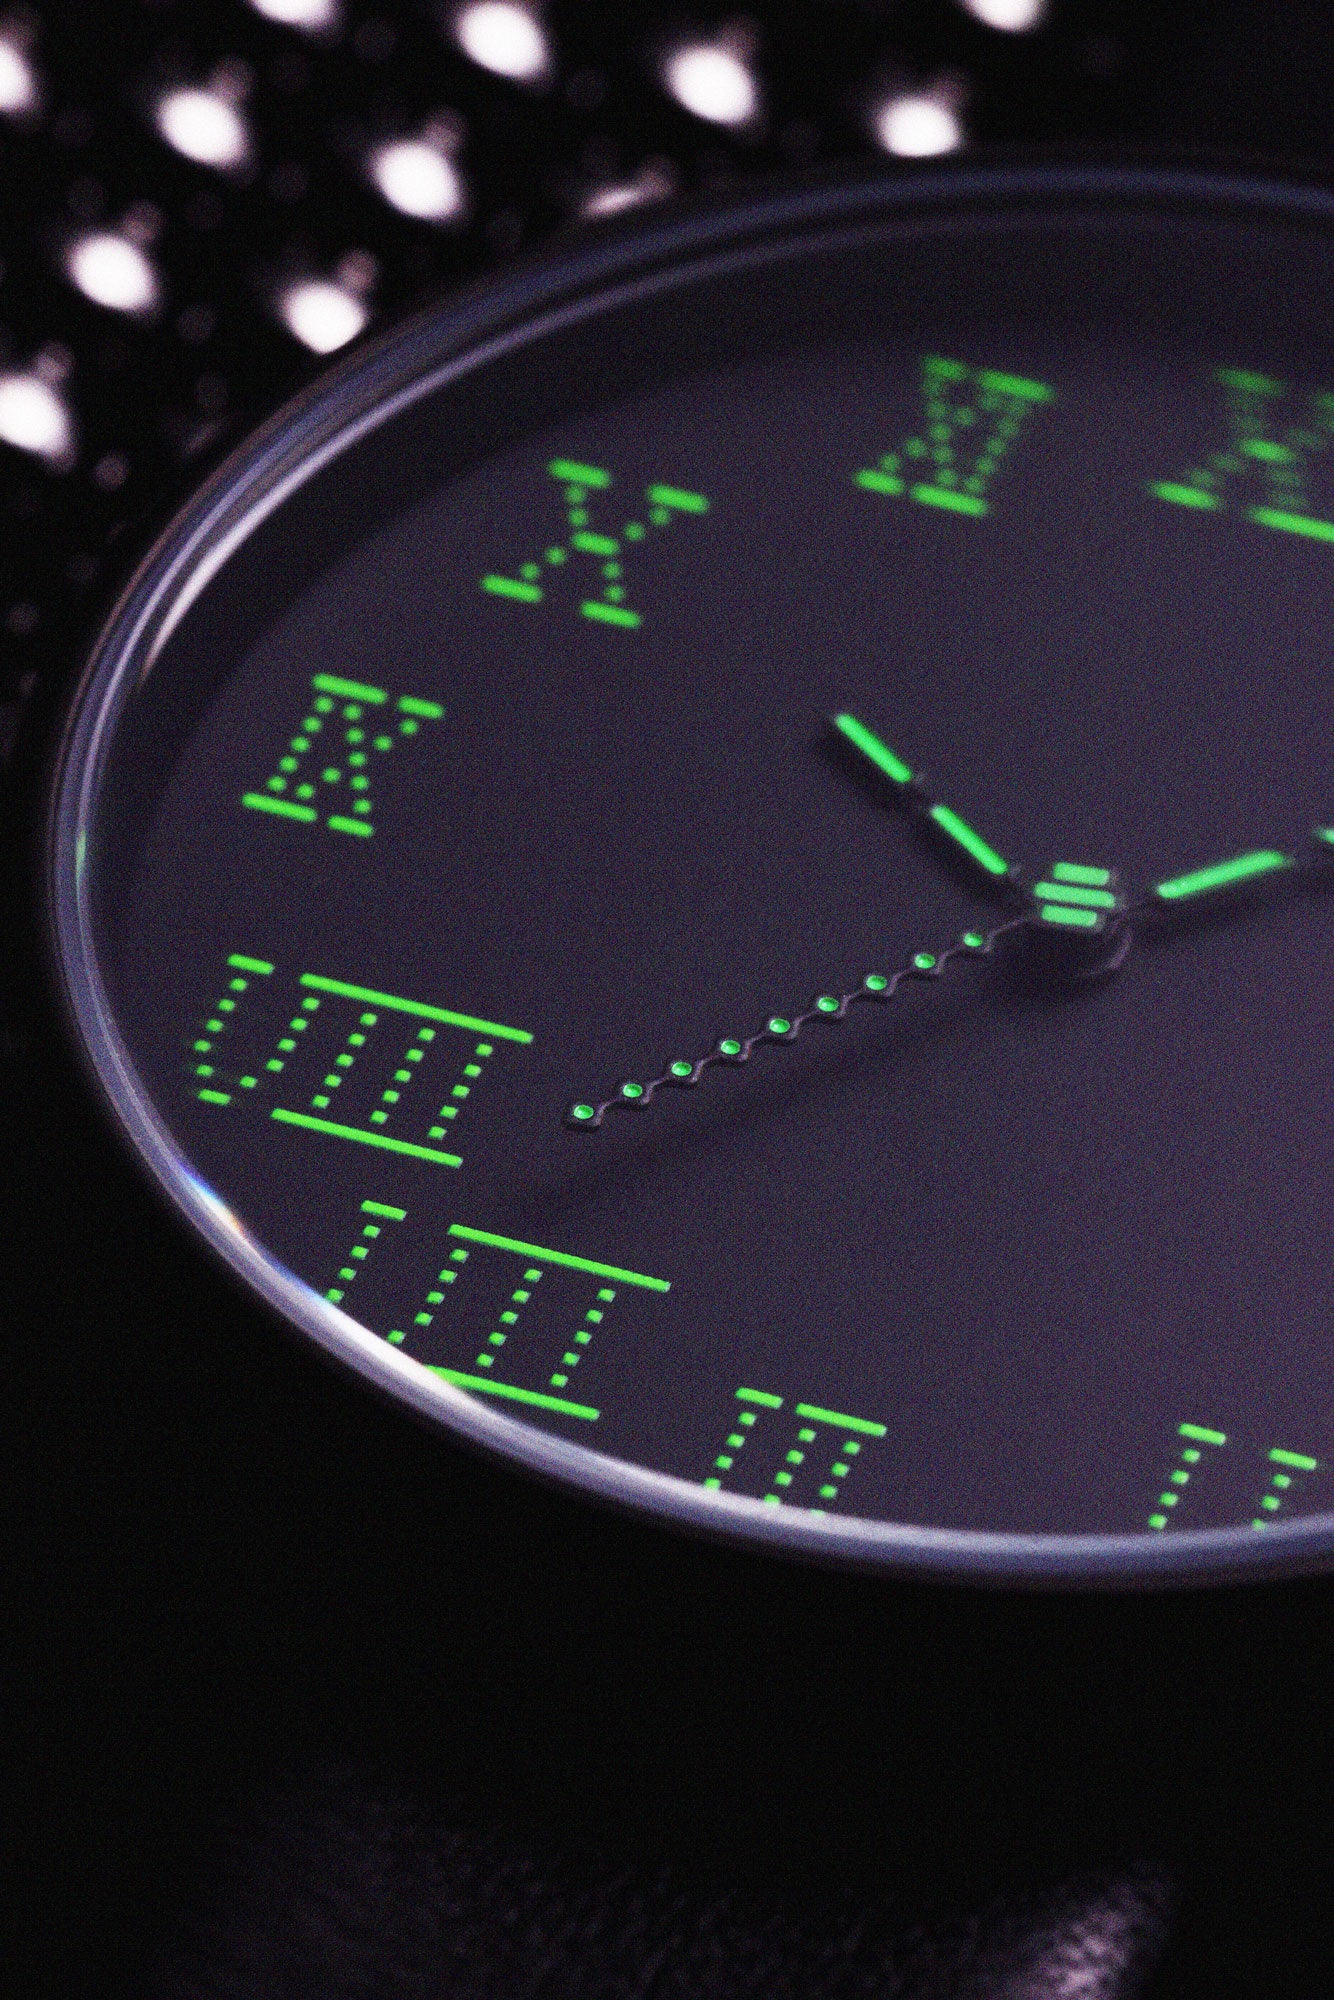 Presenting a close-up view of the dial on the front of the TTT - ACTUAL SOURCE - THERMAL watch, showcased against a backdrop of metallic spheres.